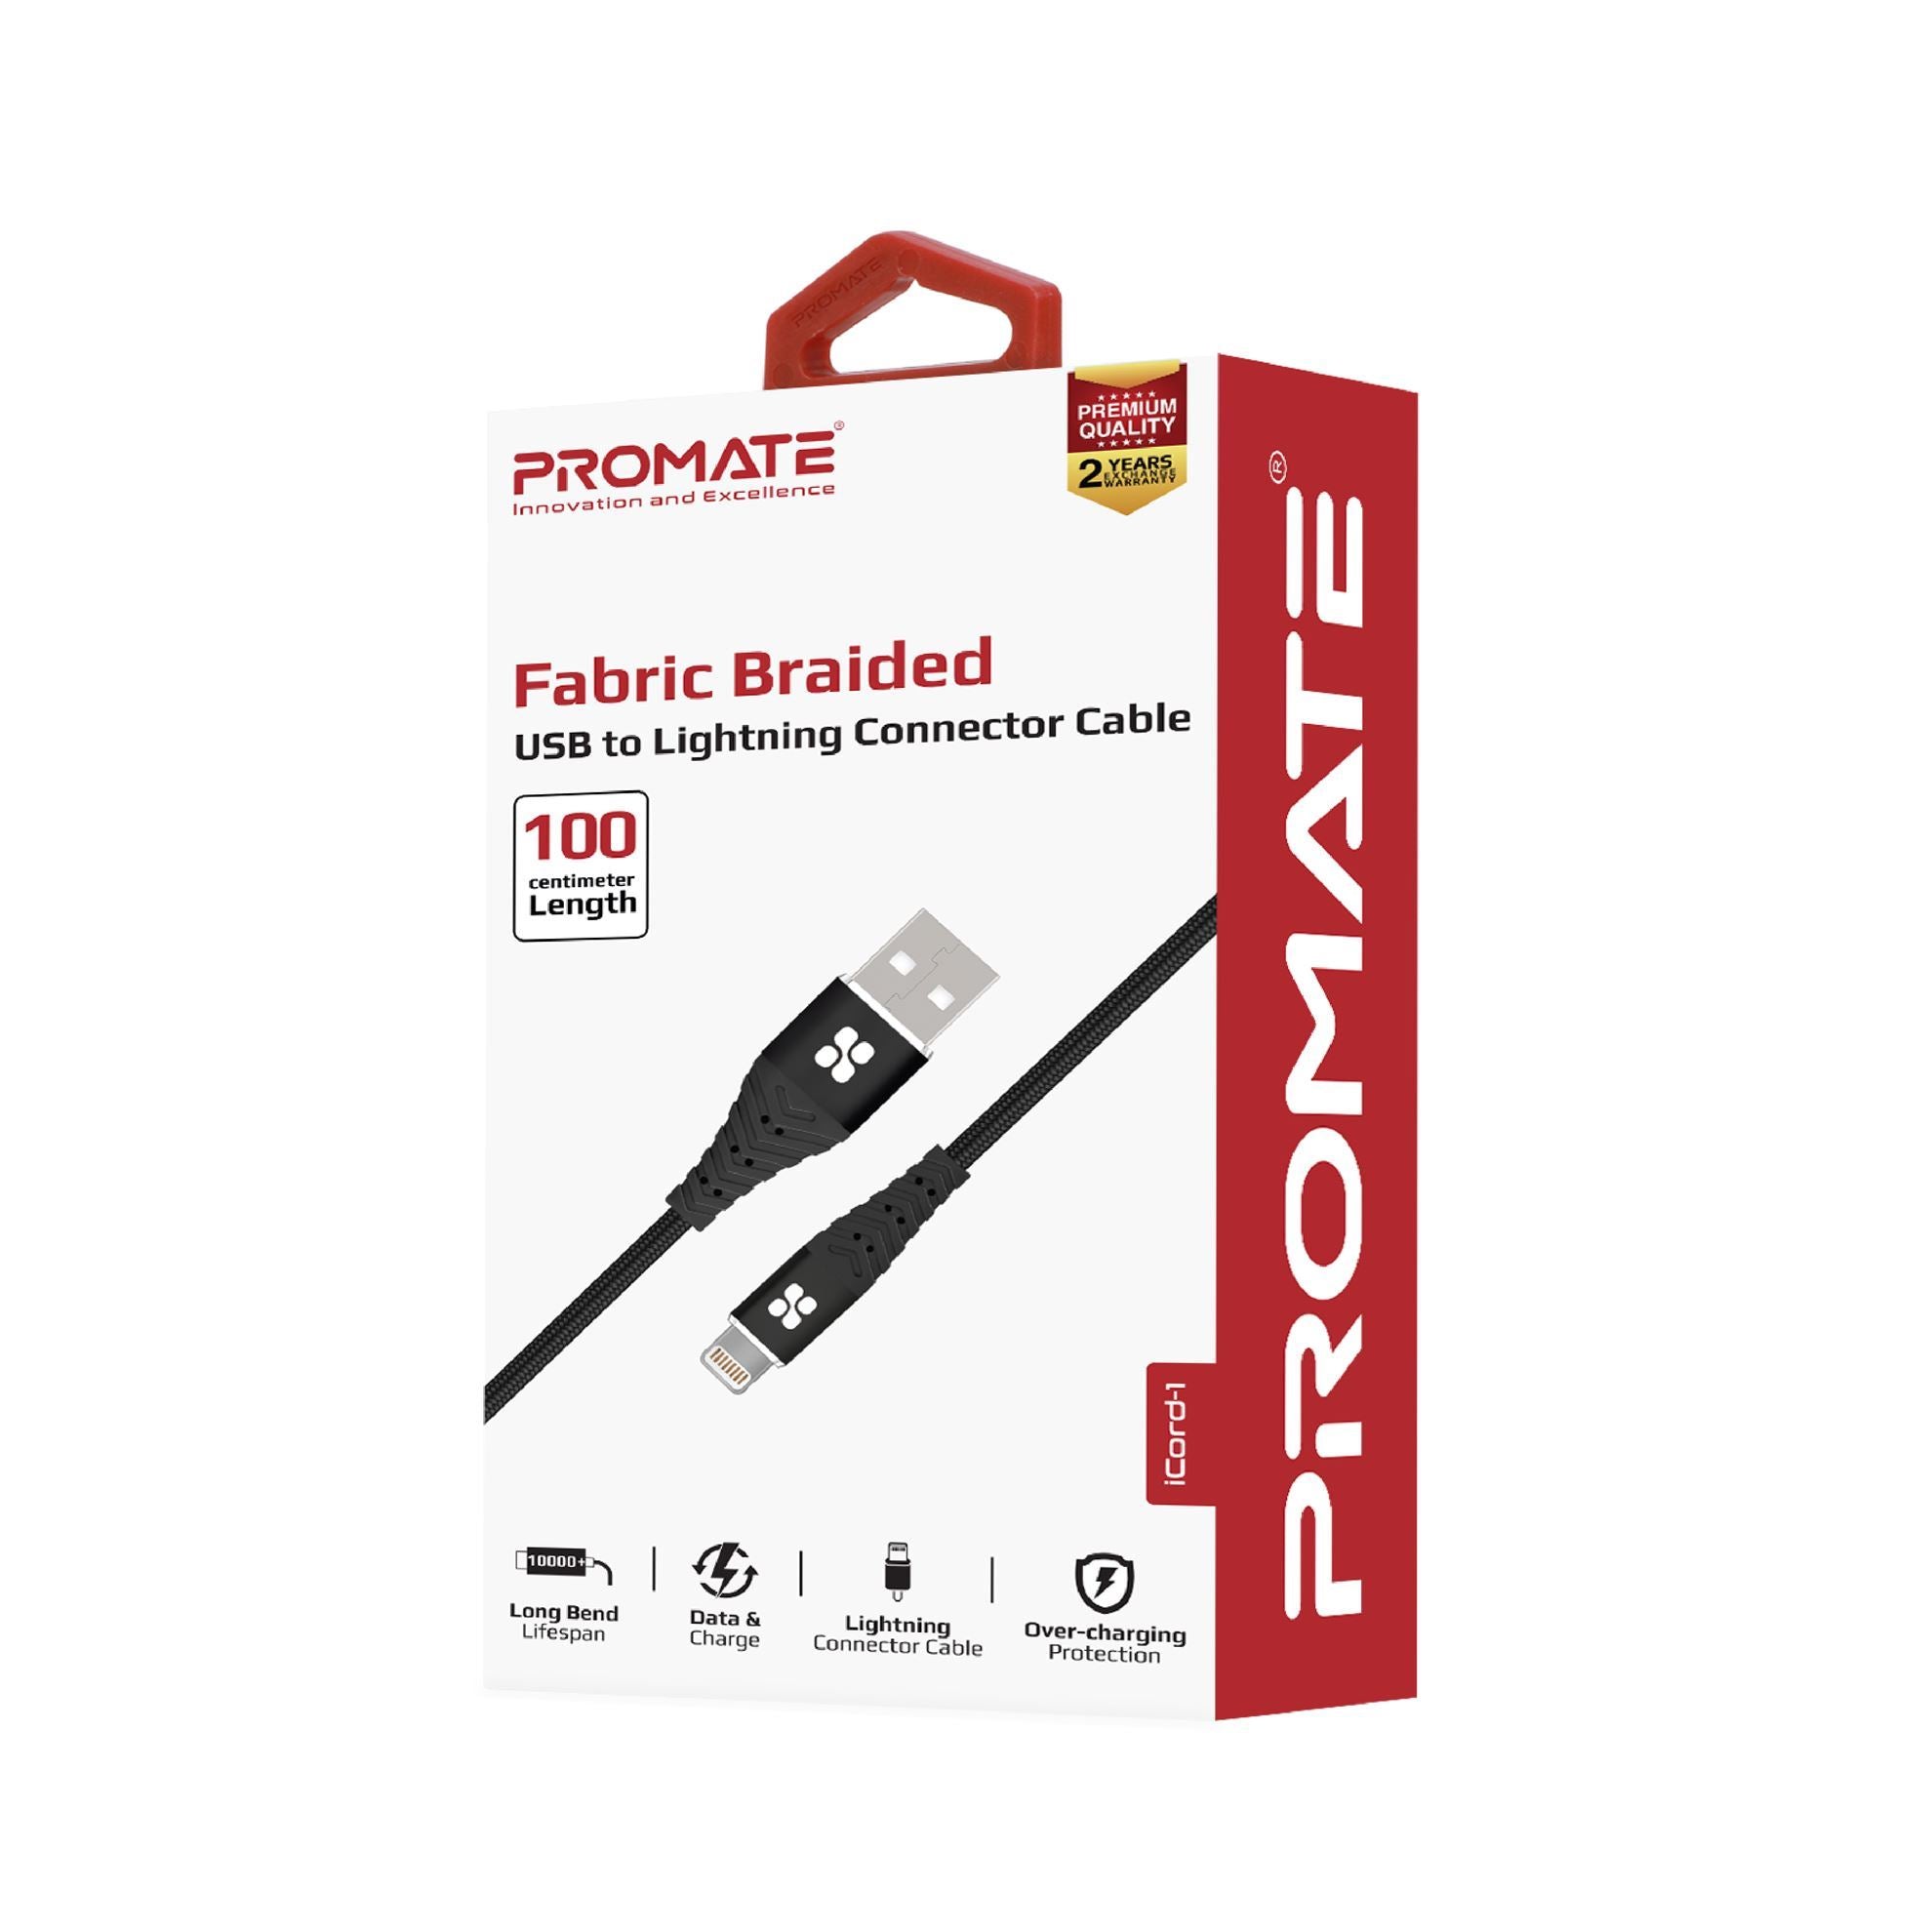 PROMATE_Braided_USB-A_to_Lightning_Connector_Cable,_2.4A_Fast_Charging,_Data_Transfer_Rate_480_Mbp,_Tangle_Free_Design 1454